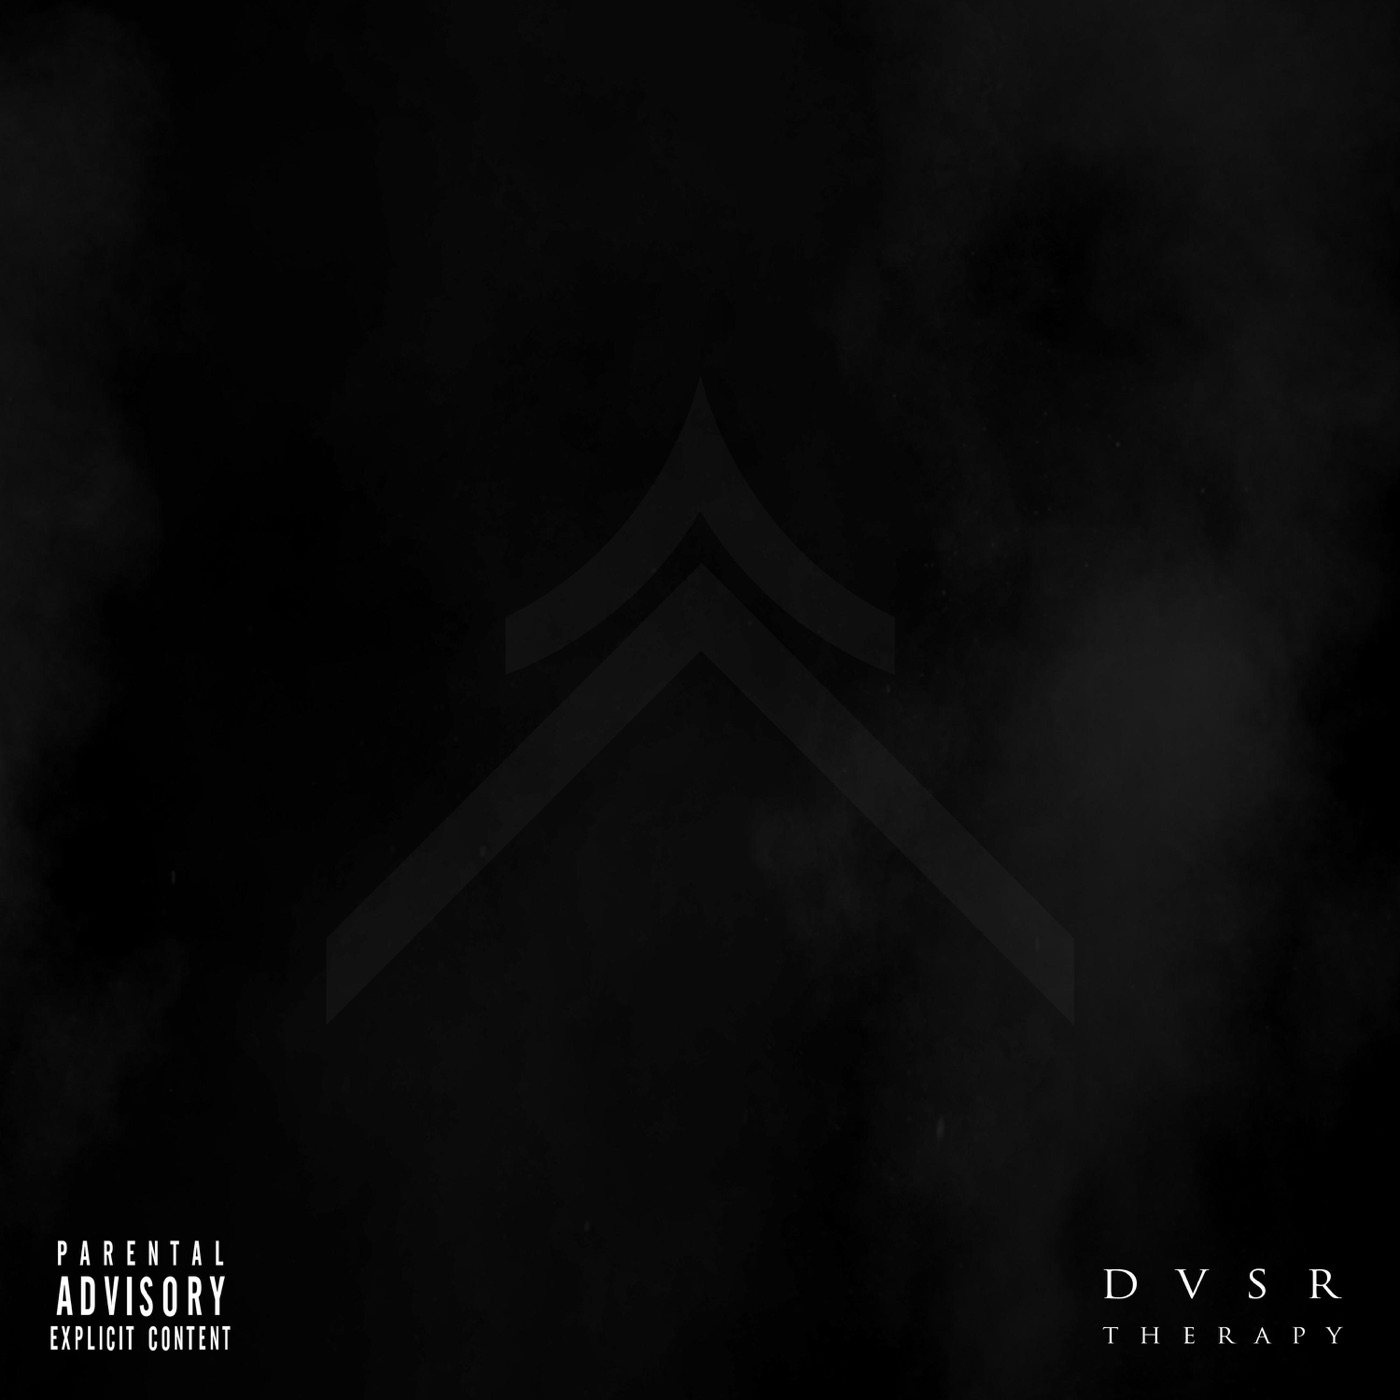 DVSR - Therapy [EP] (2017)